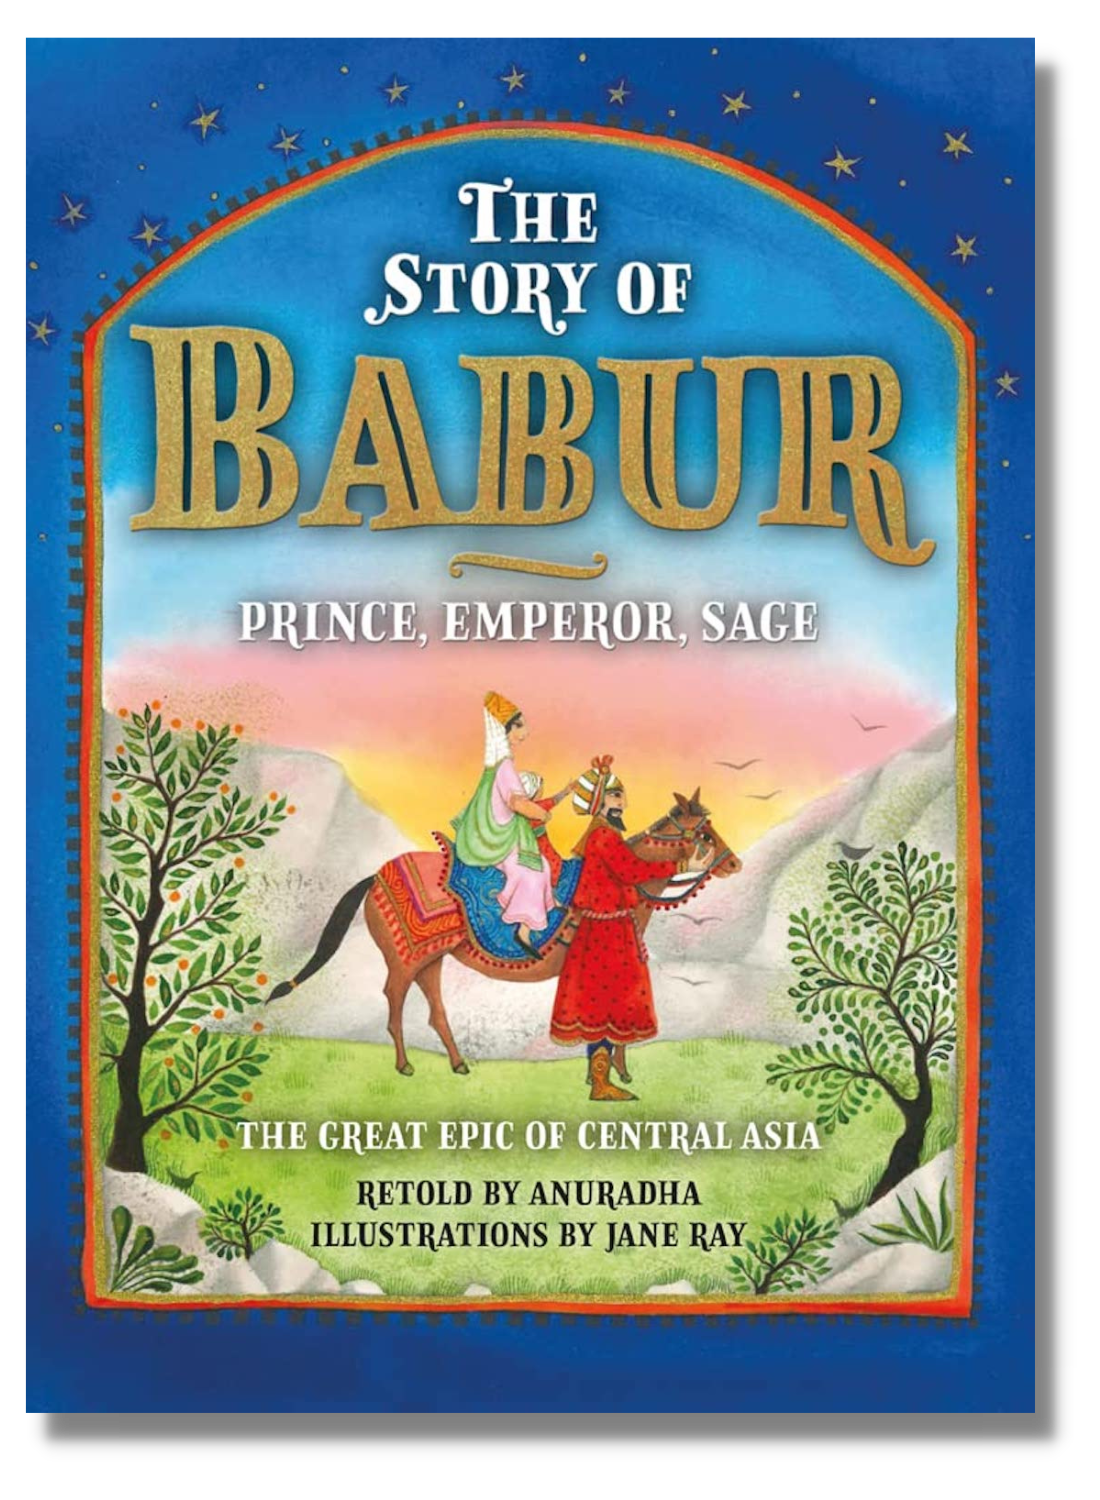 The cover of "The Story of Babur"